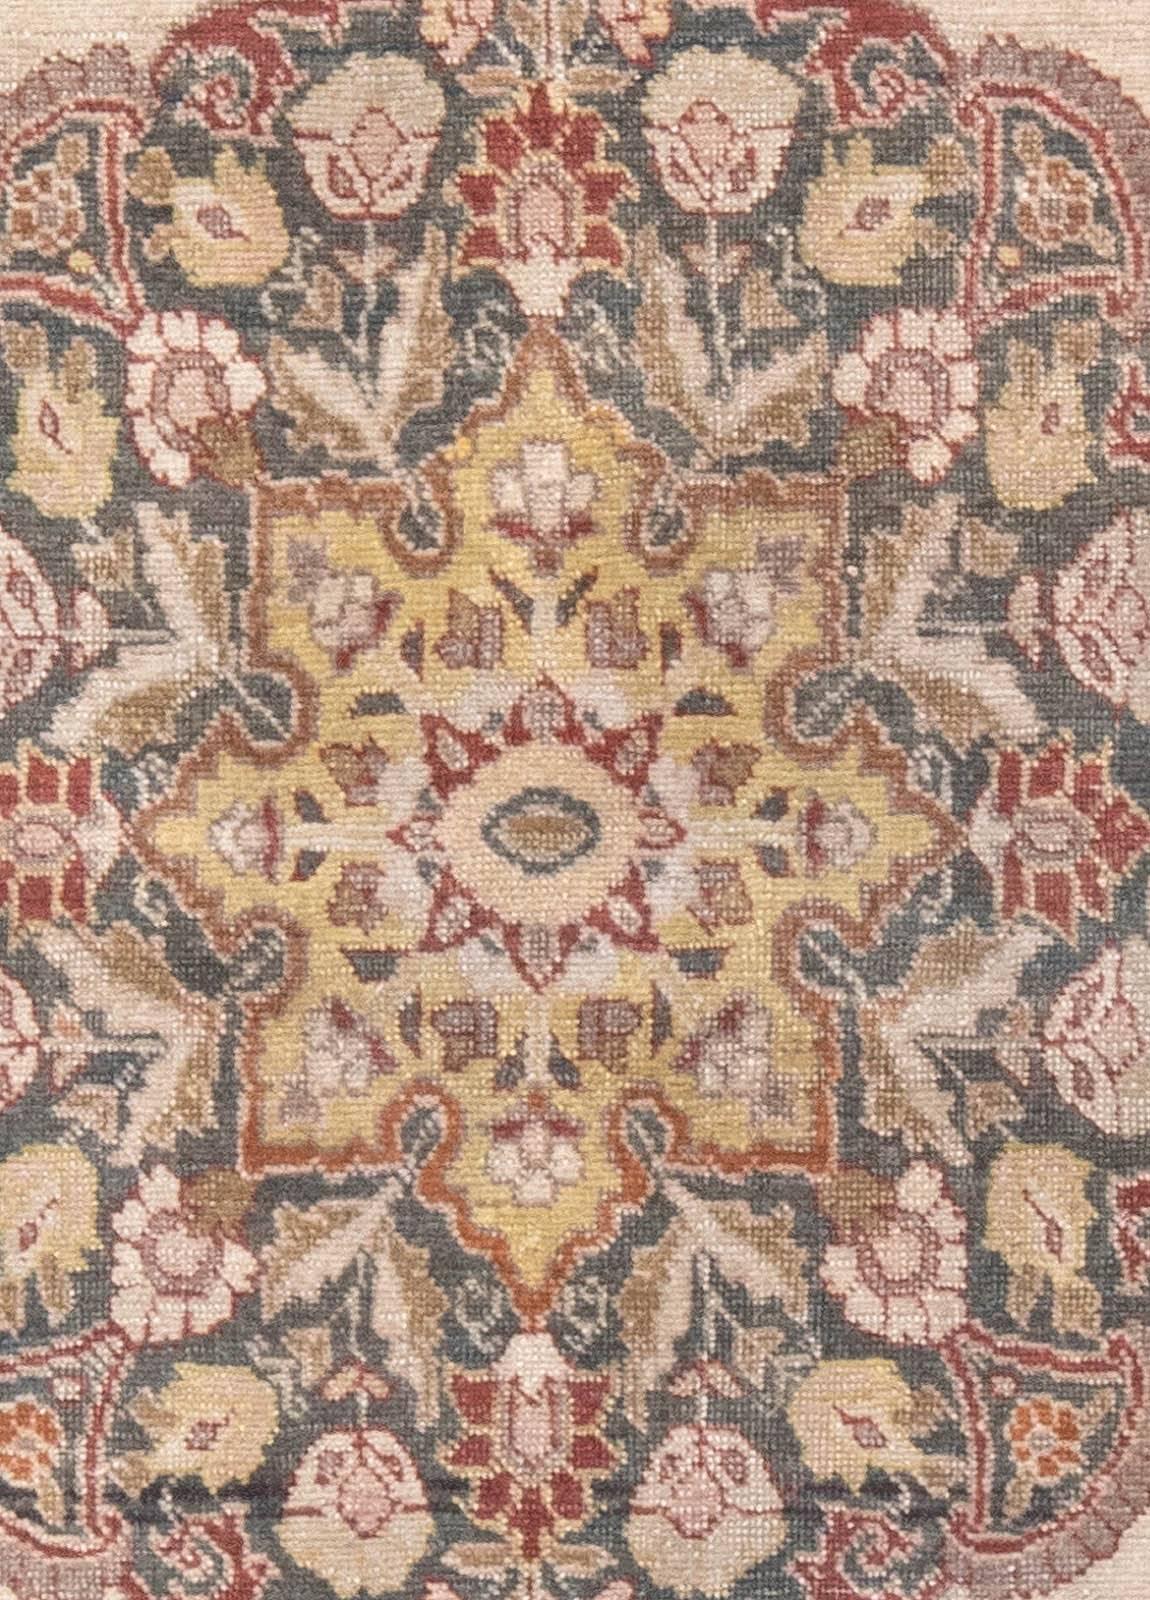 Early 20th century Persian Tabriz handwoven wool rug
Size: 4'0